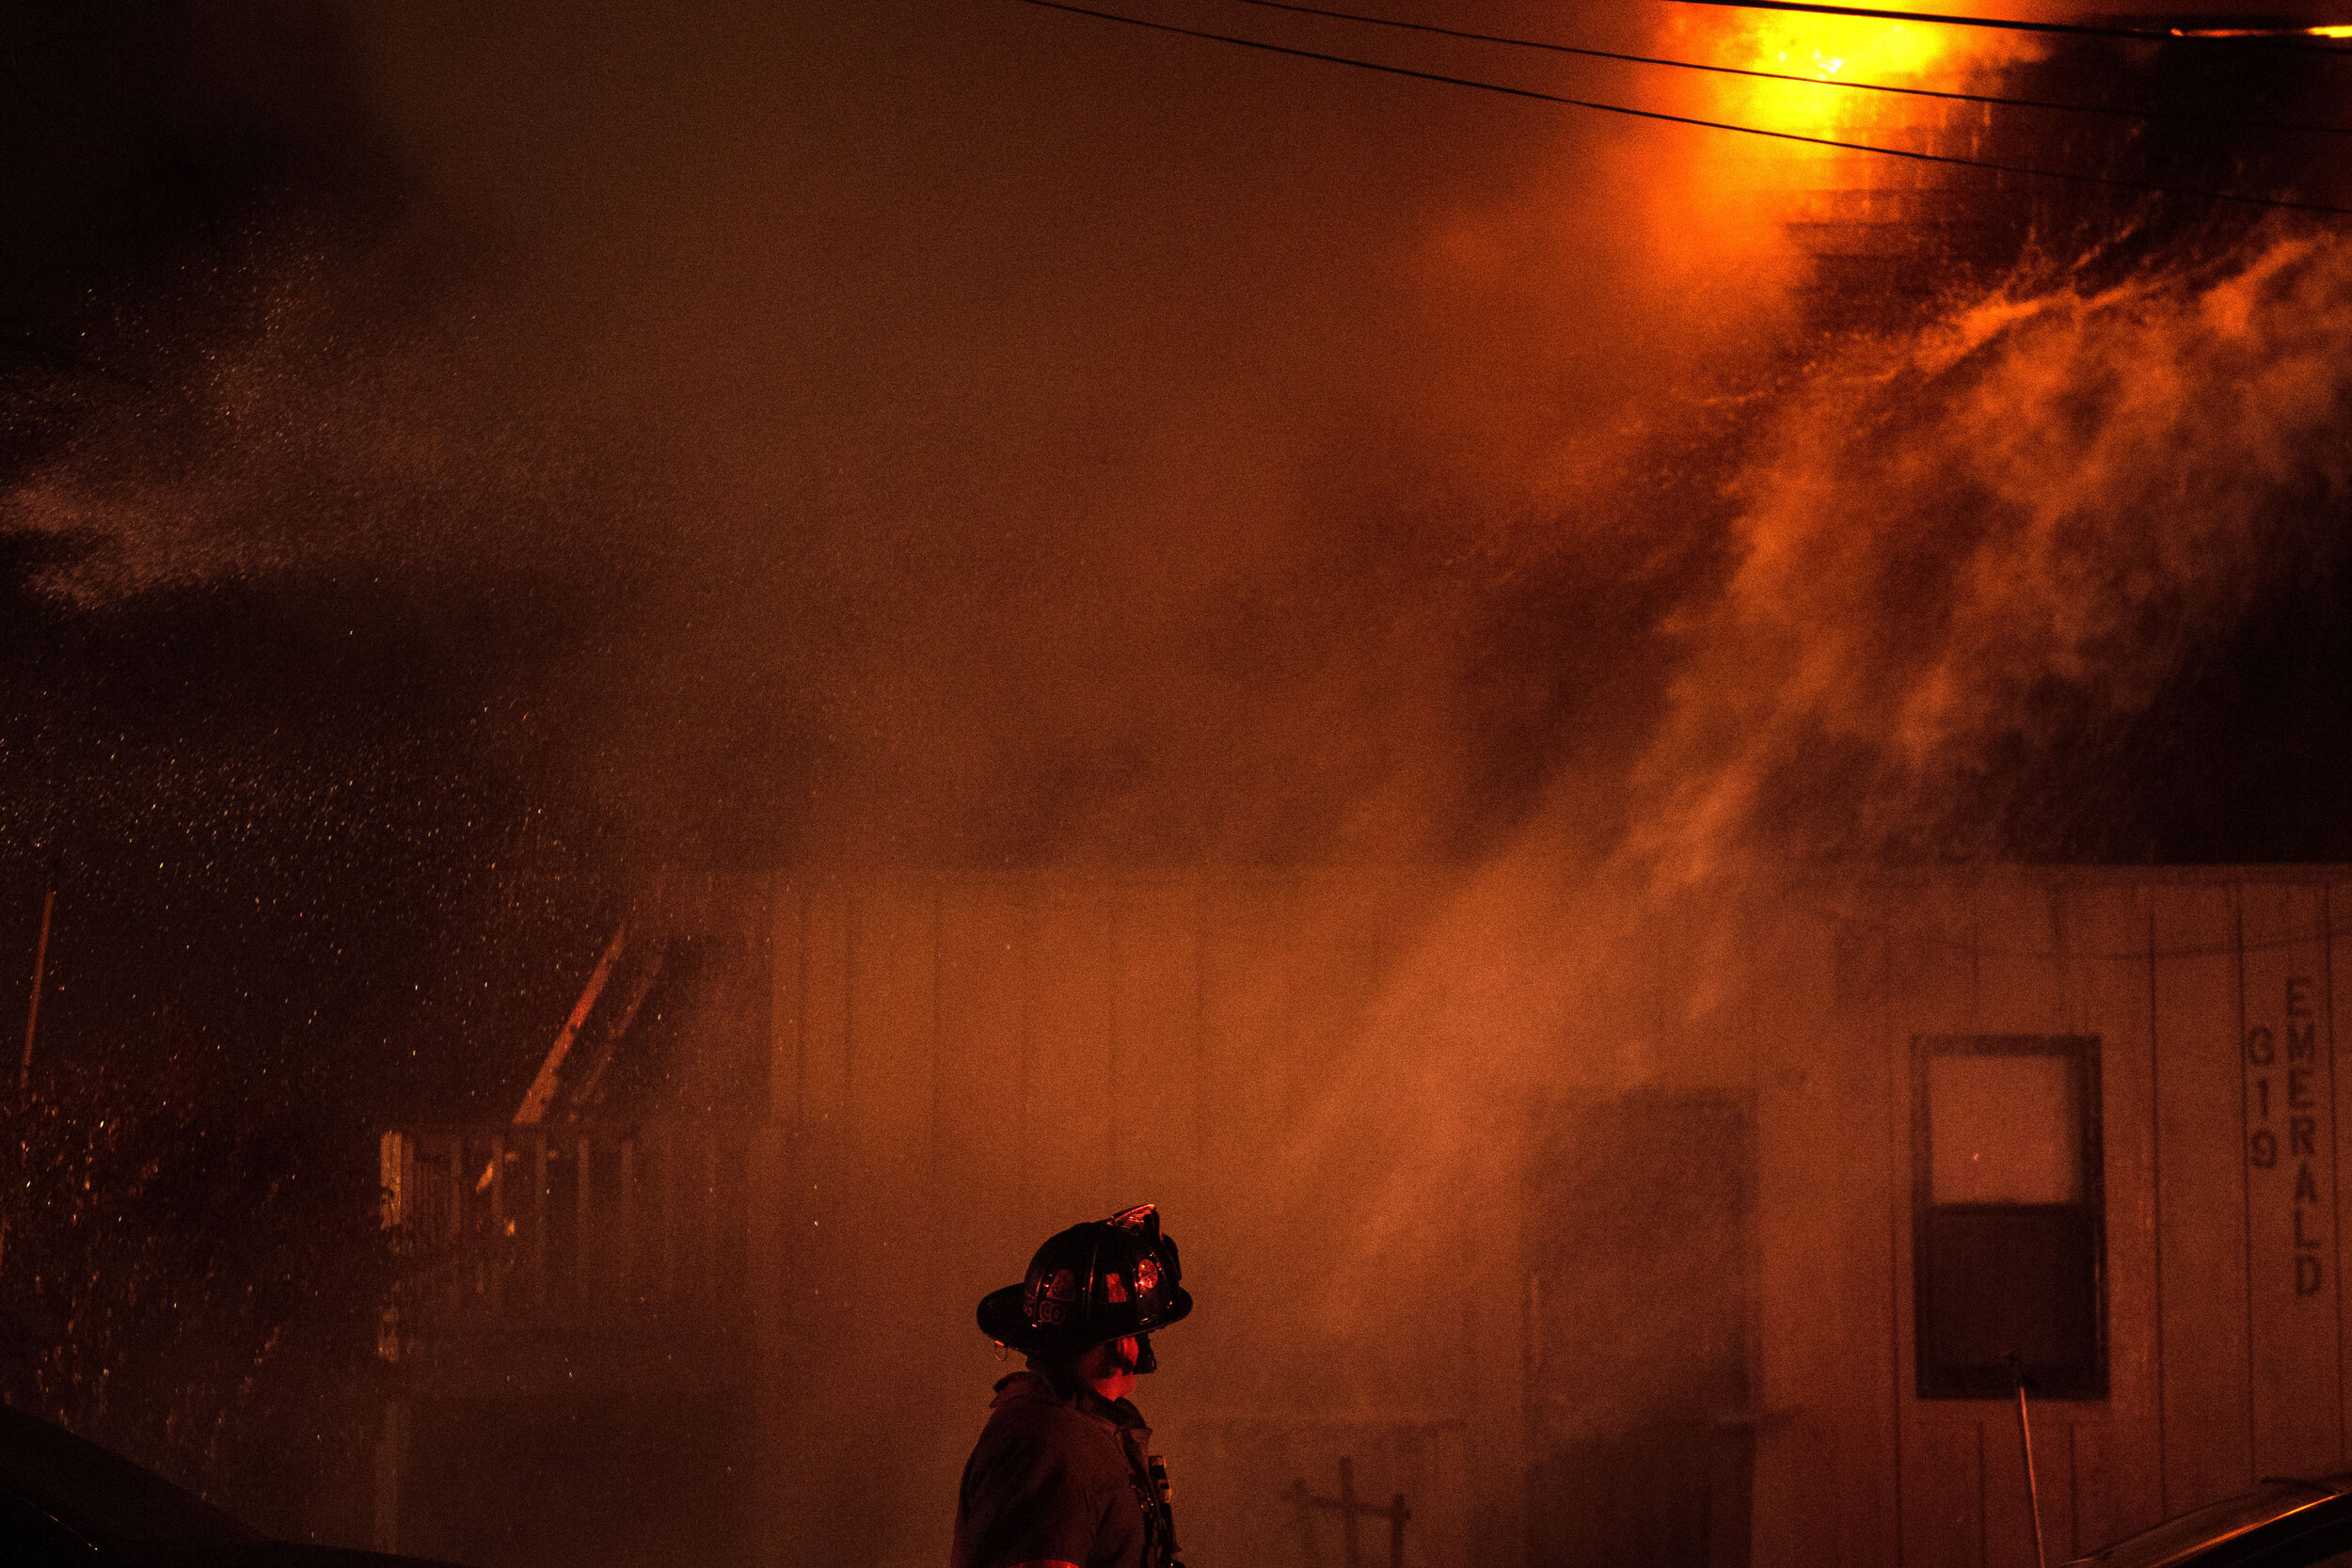  Grand Rapids Fire Department responds to an apartment fire on Emerald Avenue in Grand Rapids, Michigan on Friday, Feb. 22. 